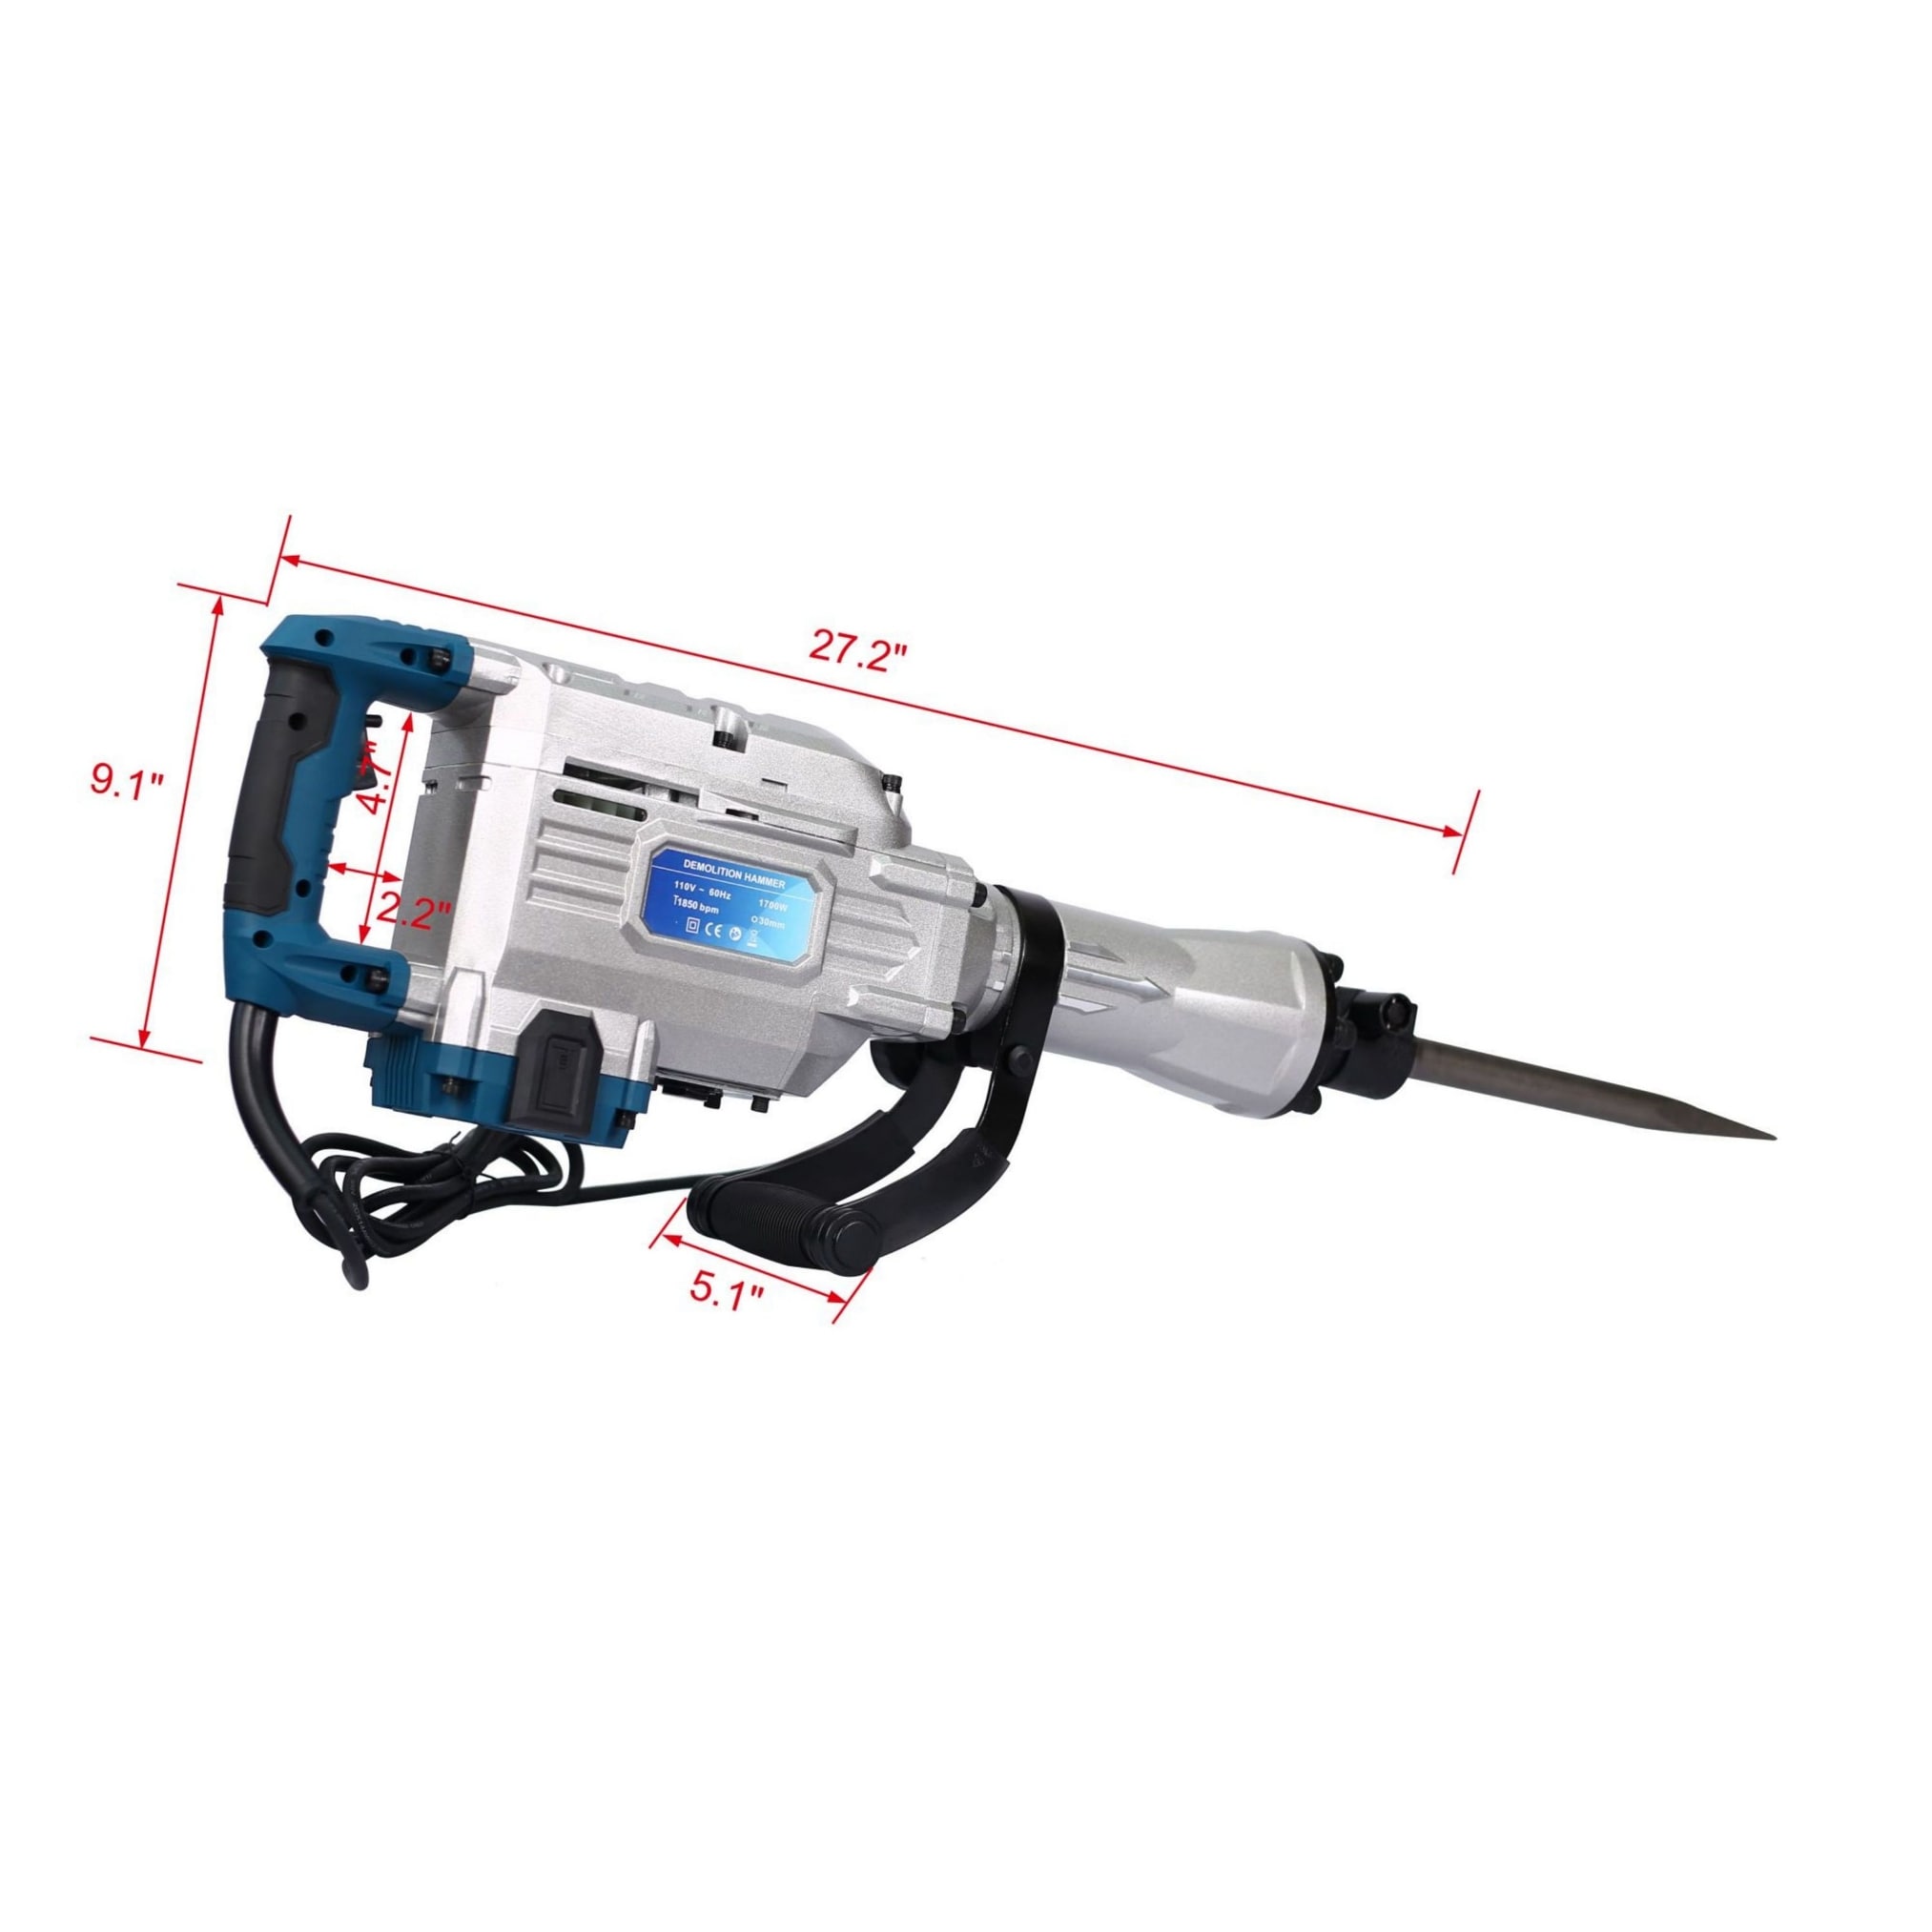 https://ak1.ostkcdn.com/images/products/is/images/direct/9390c479070cfa41ae6e192e07ca9a0703be62fd/1700W-1900-BPM-Electric-Demolition-Jack-Breaker-Drills-Kit.jpg